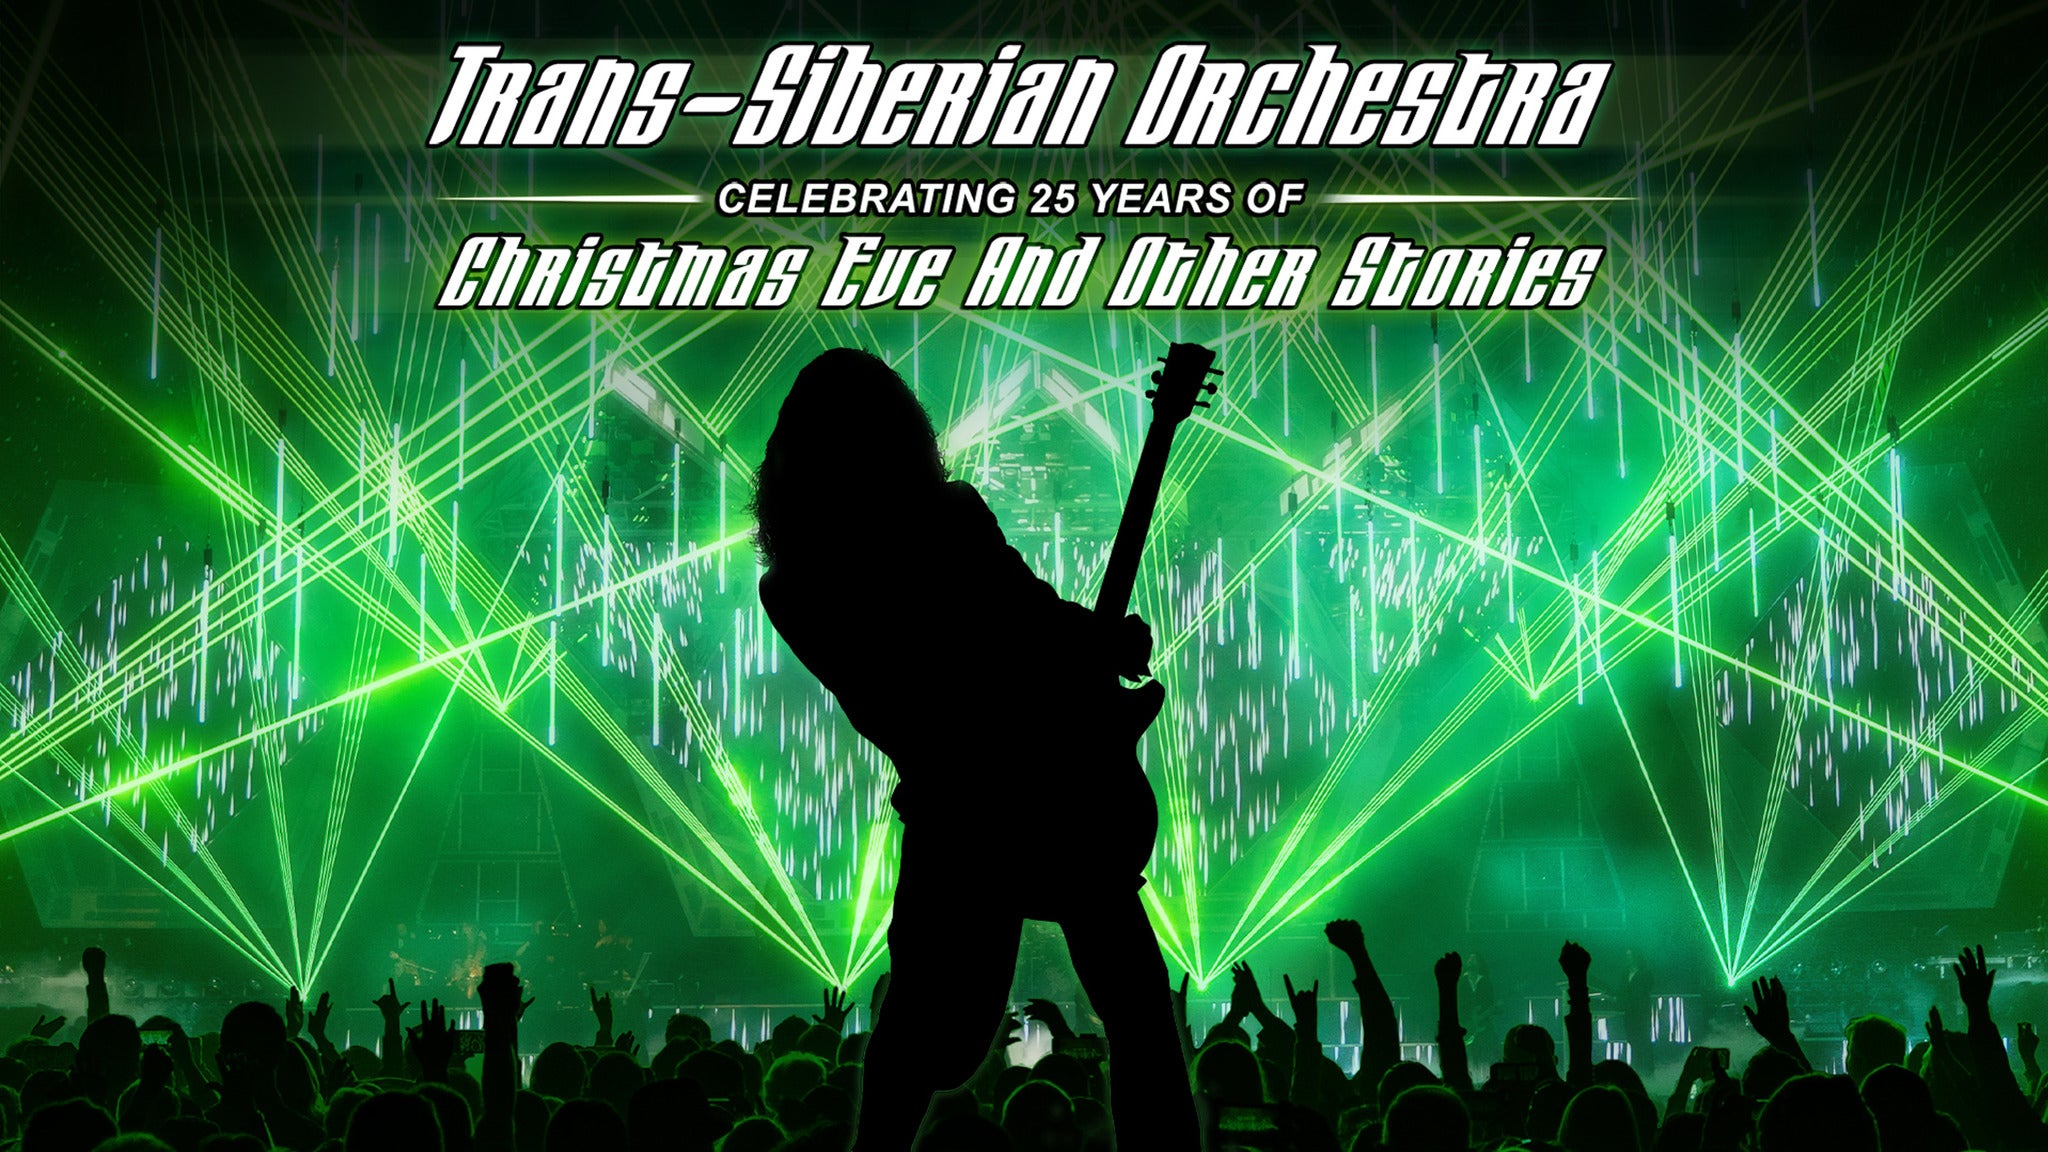 Trans-Siberian Orchestra-Christmas Eve & Other Stories in St Louis promo photo for Citi® Cardmember Preferred presale offer code